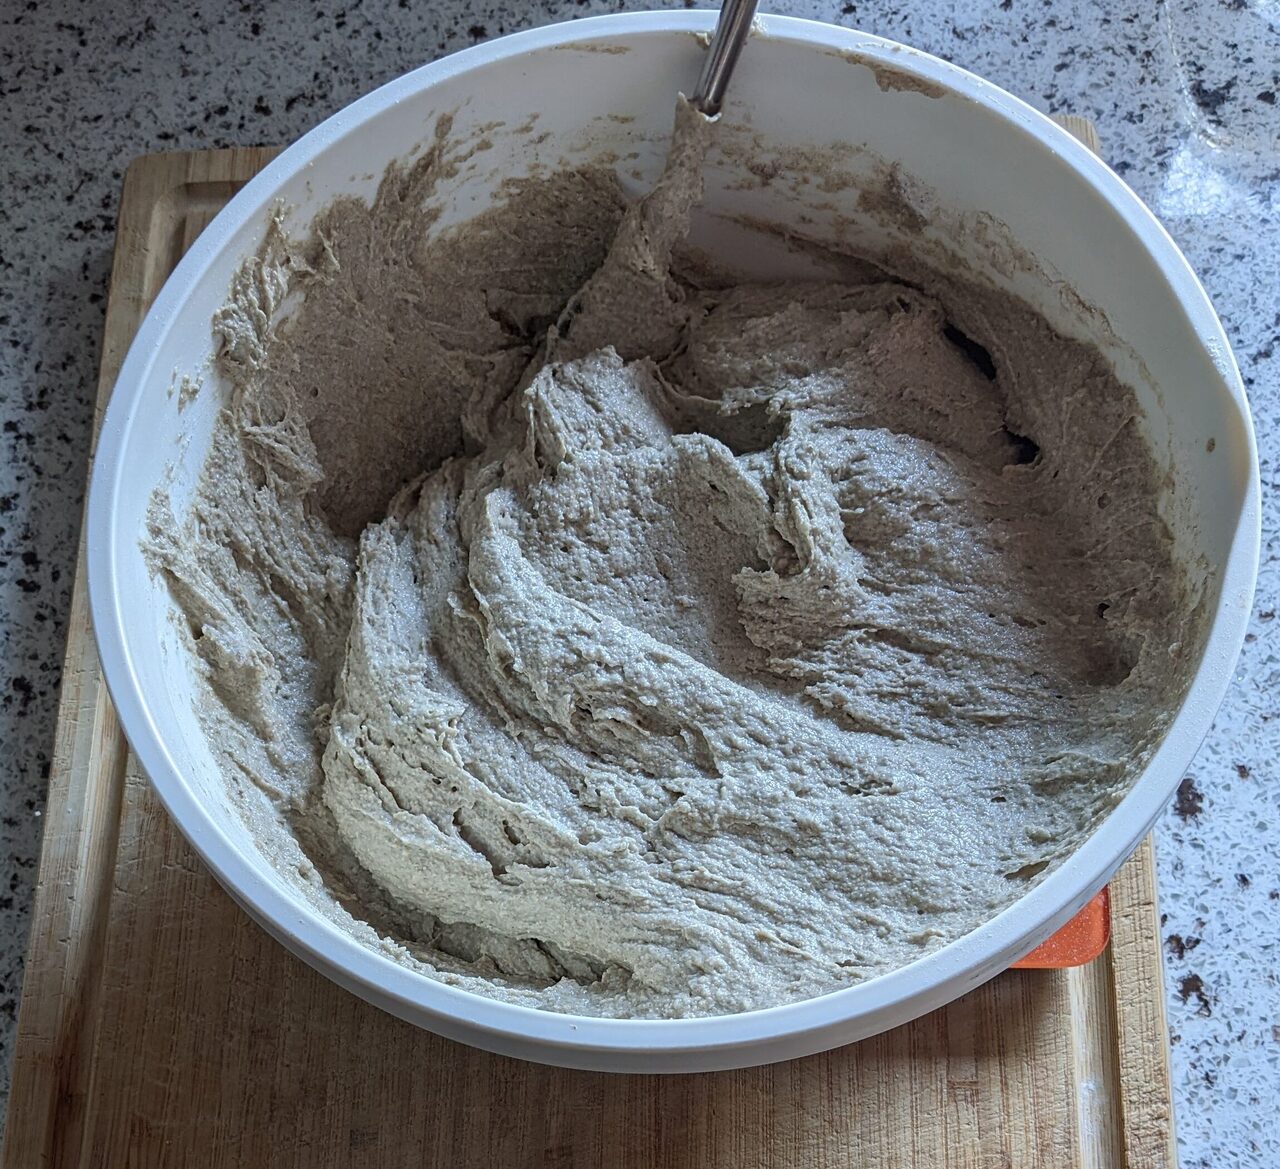 After mixing. Dough has a soft consistency.